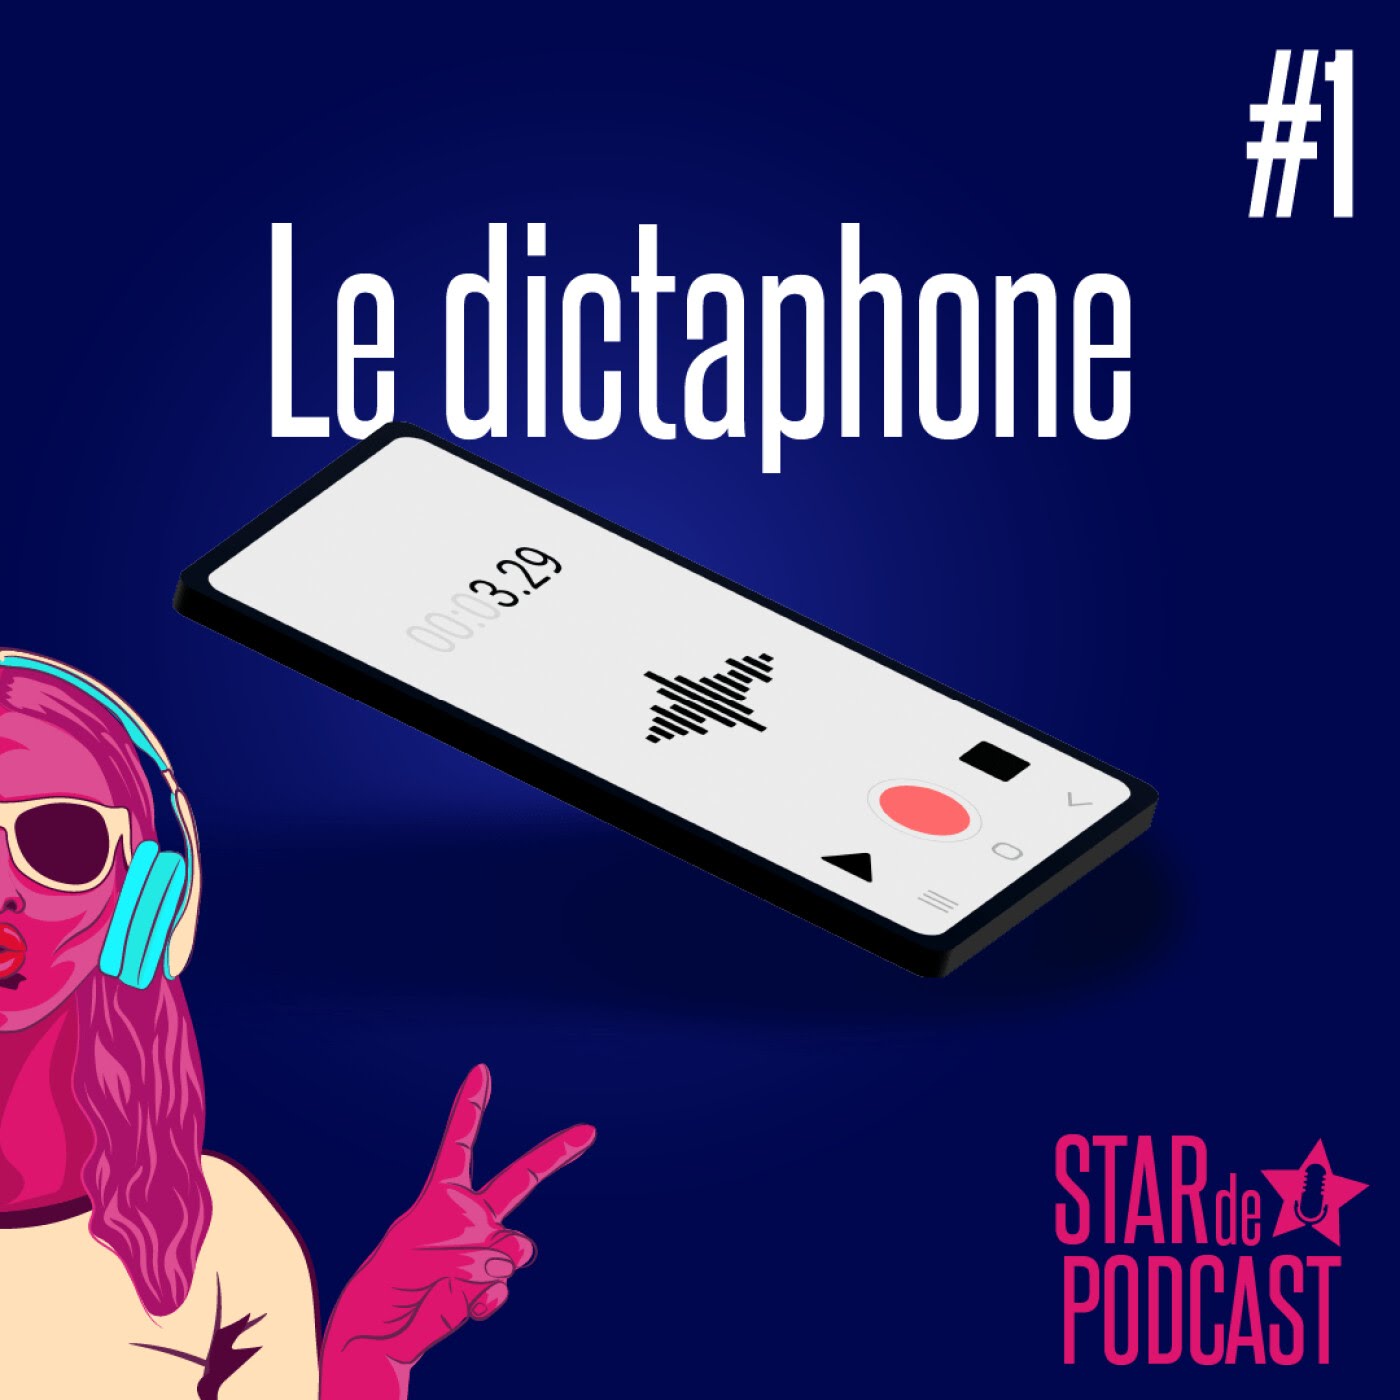 Episode 1 – Le dictaphone